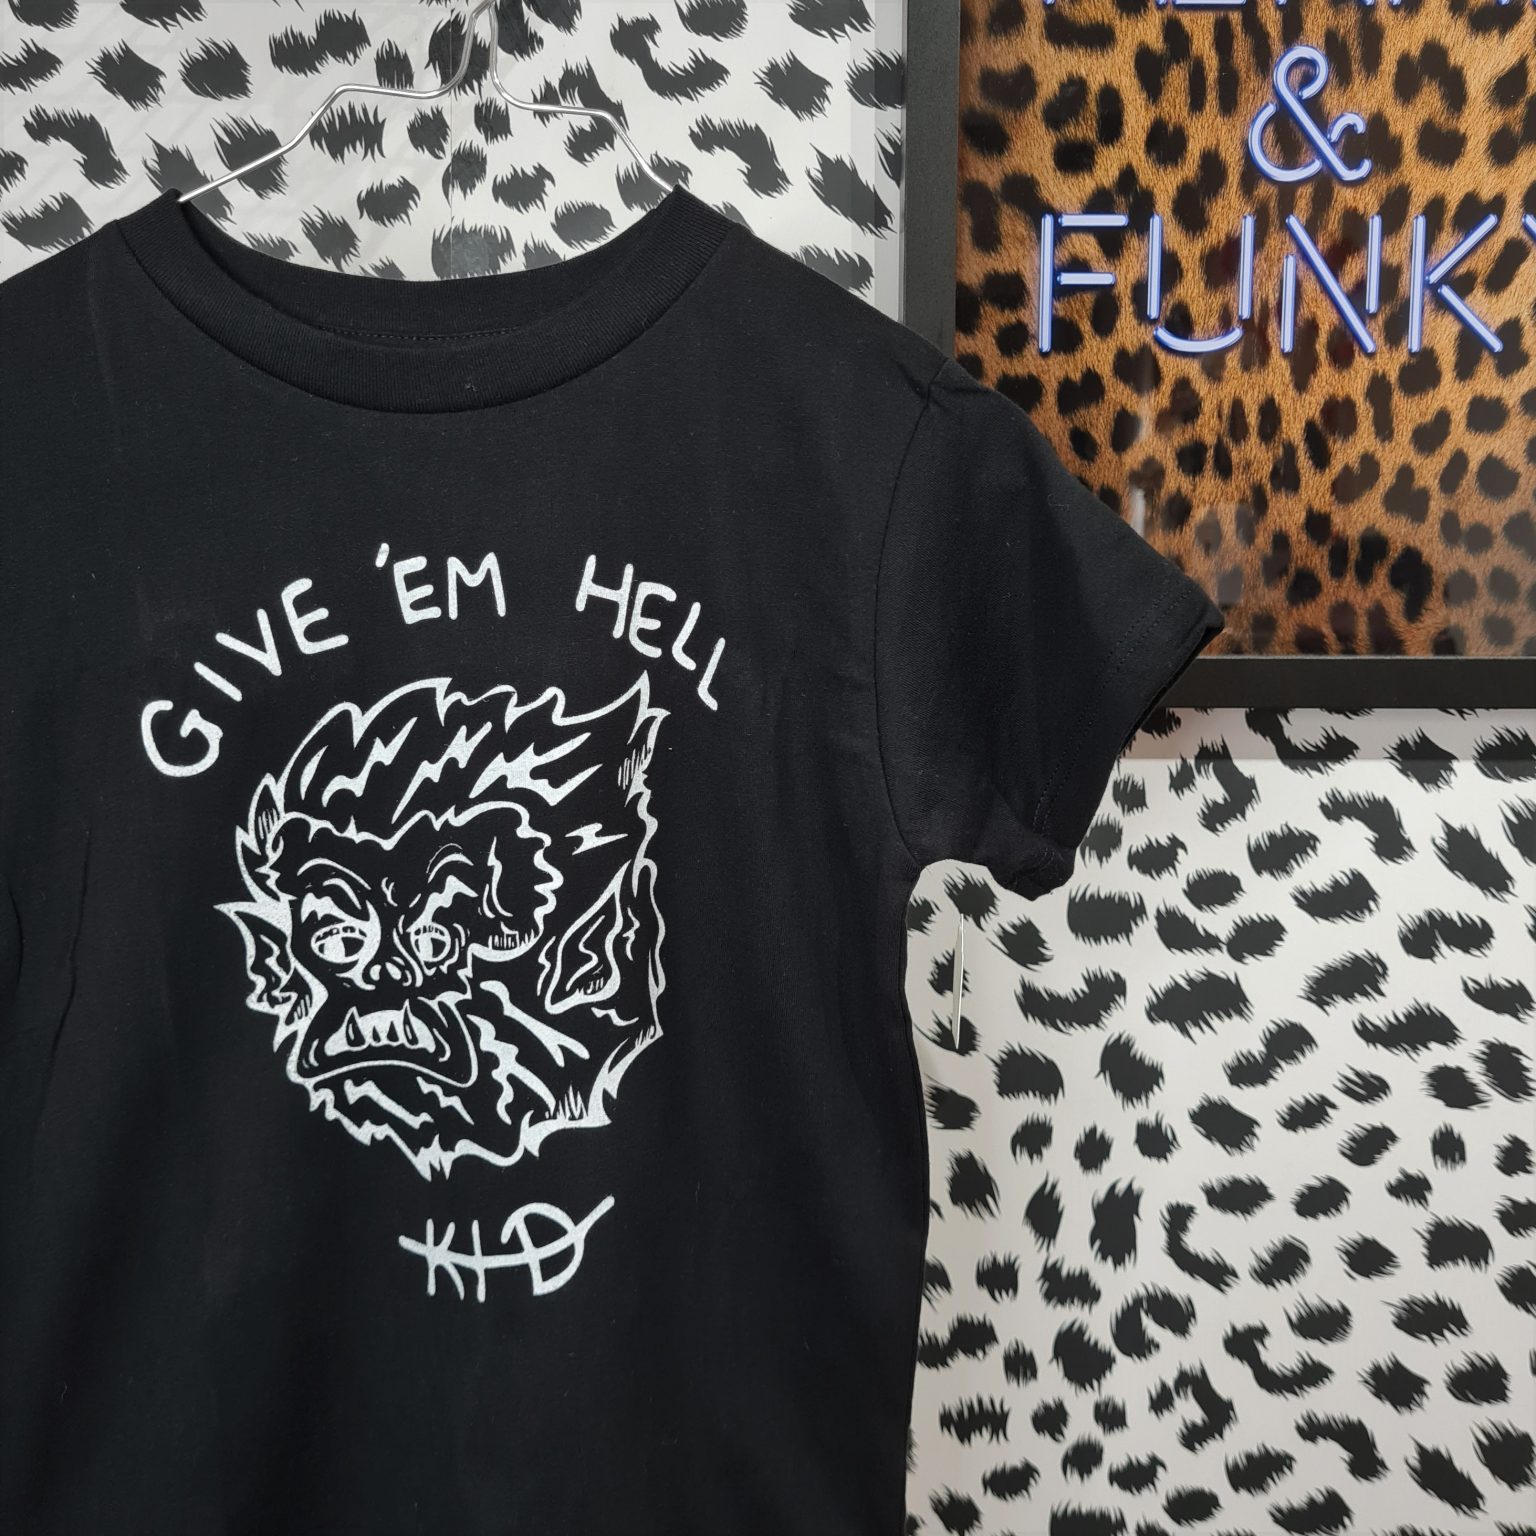 Give Em Hell T-Shirt - Feral & Funky Kids Co